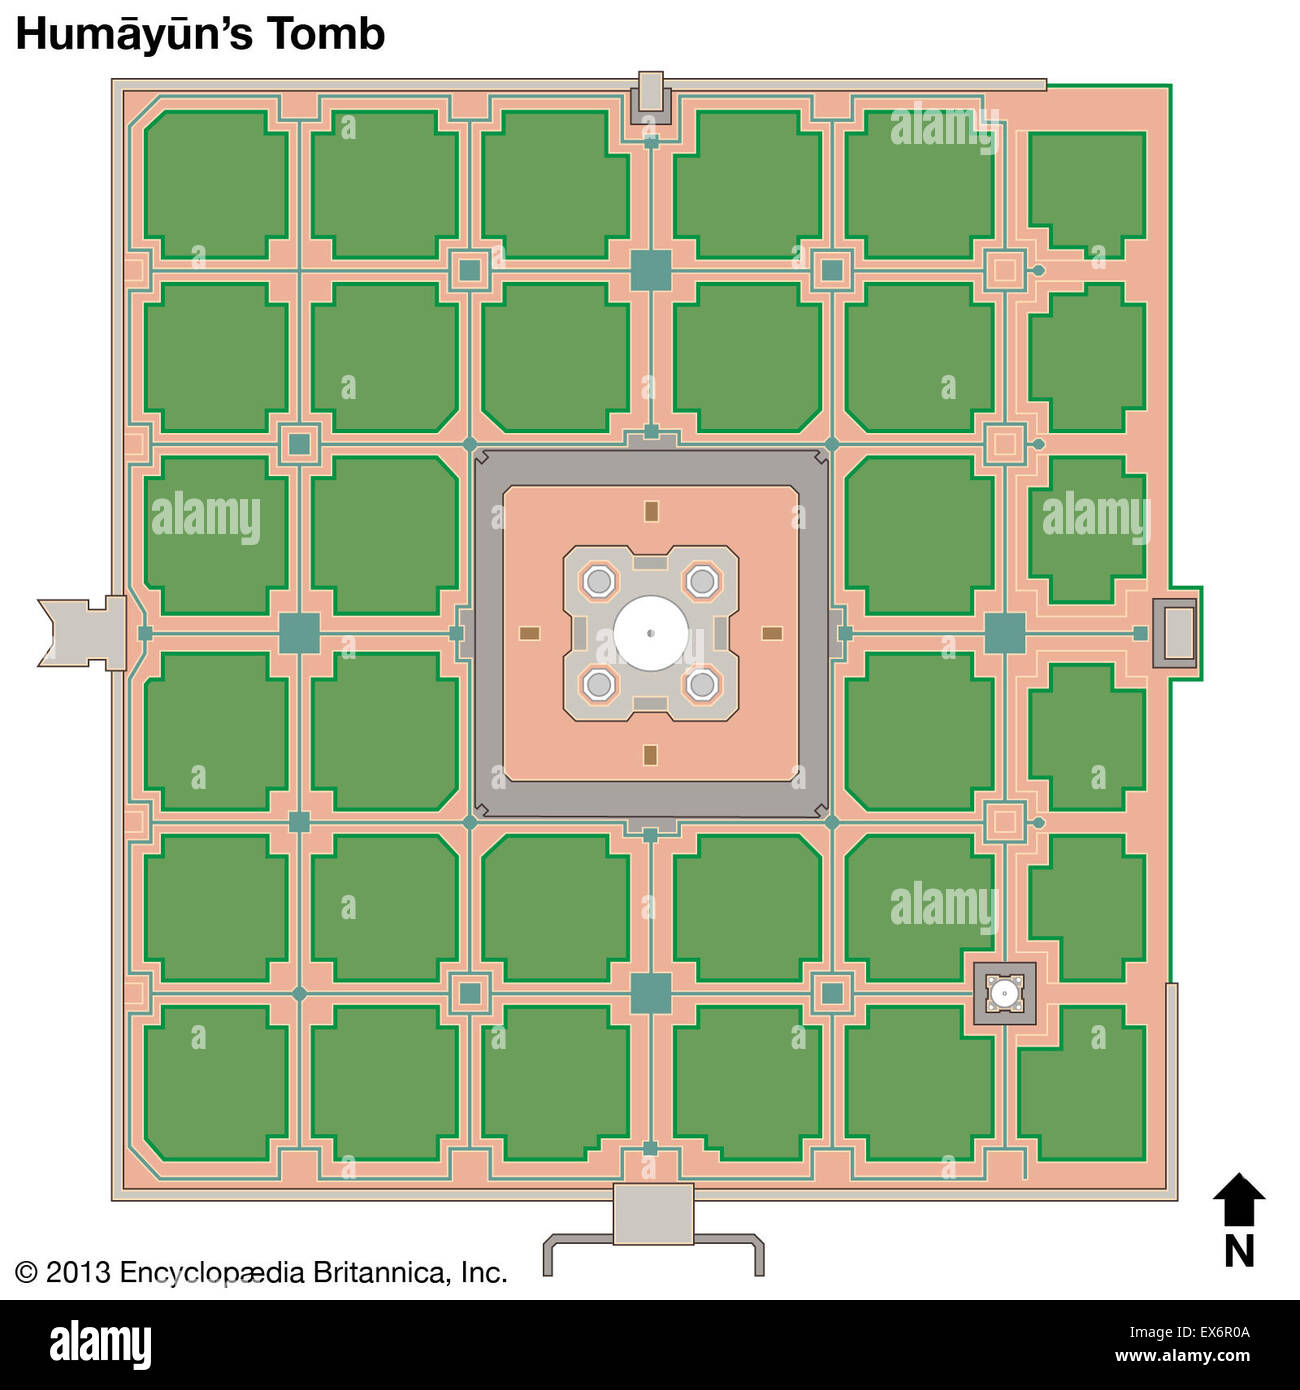 Schematic drawing of Humayun's Tomb Stock Photo